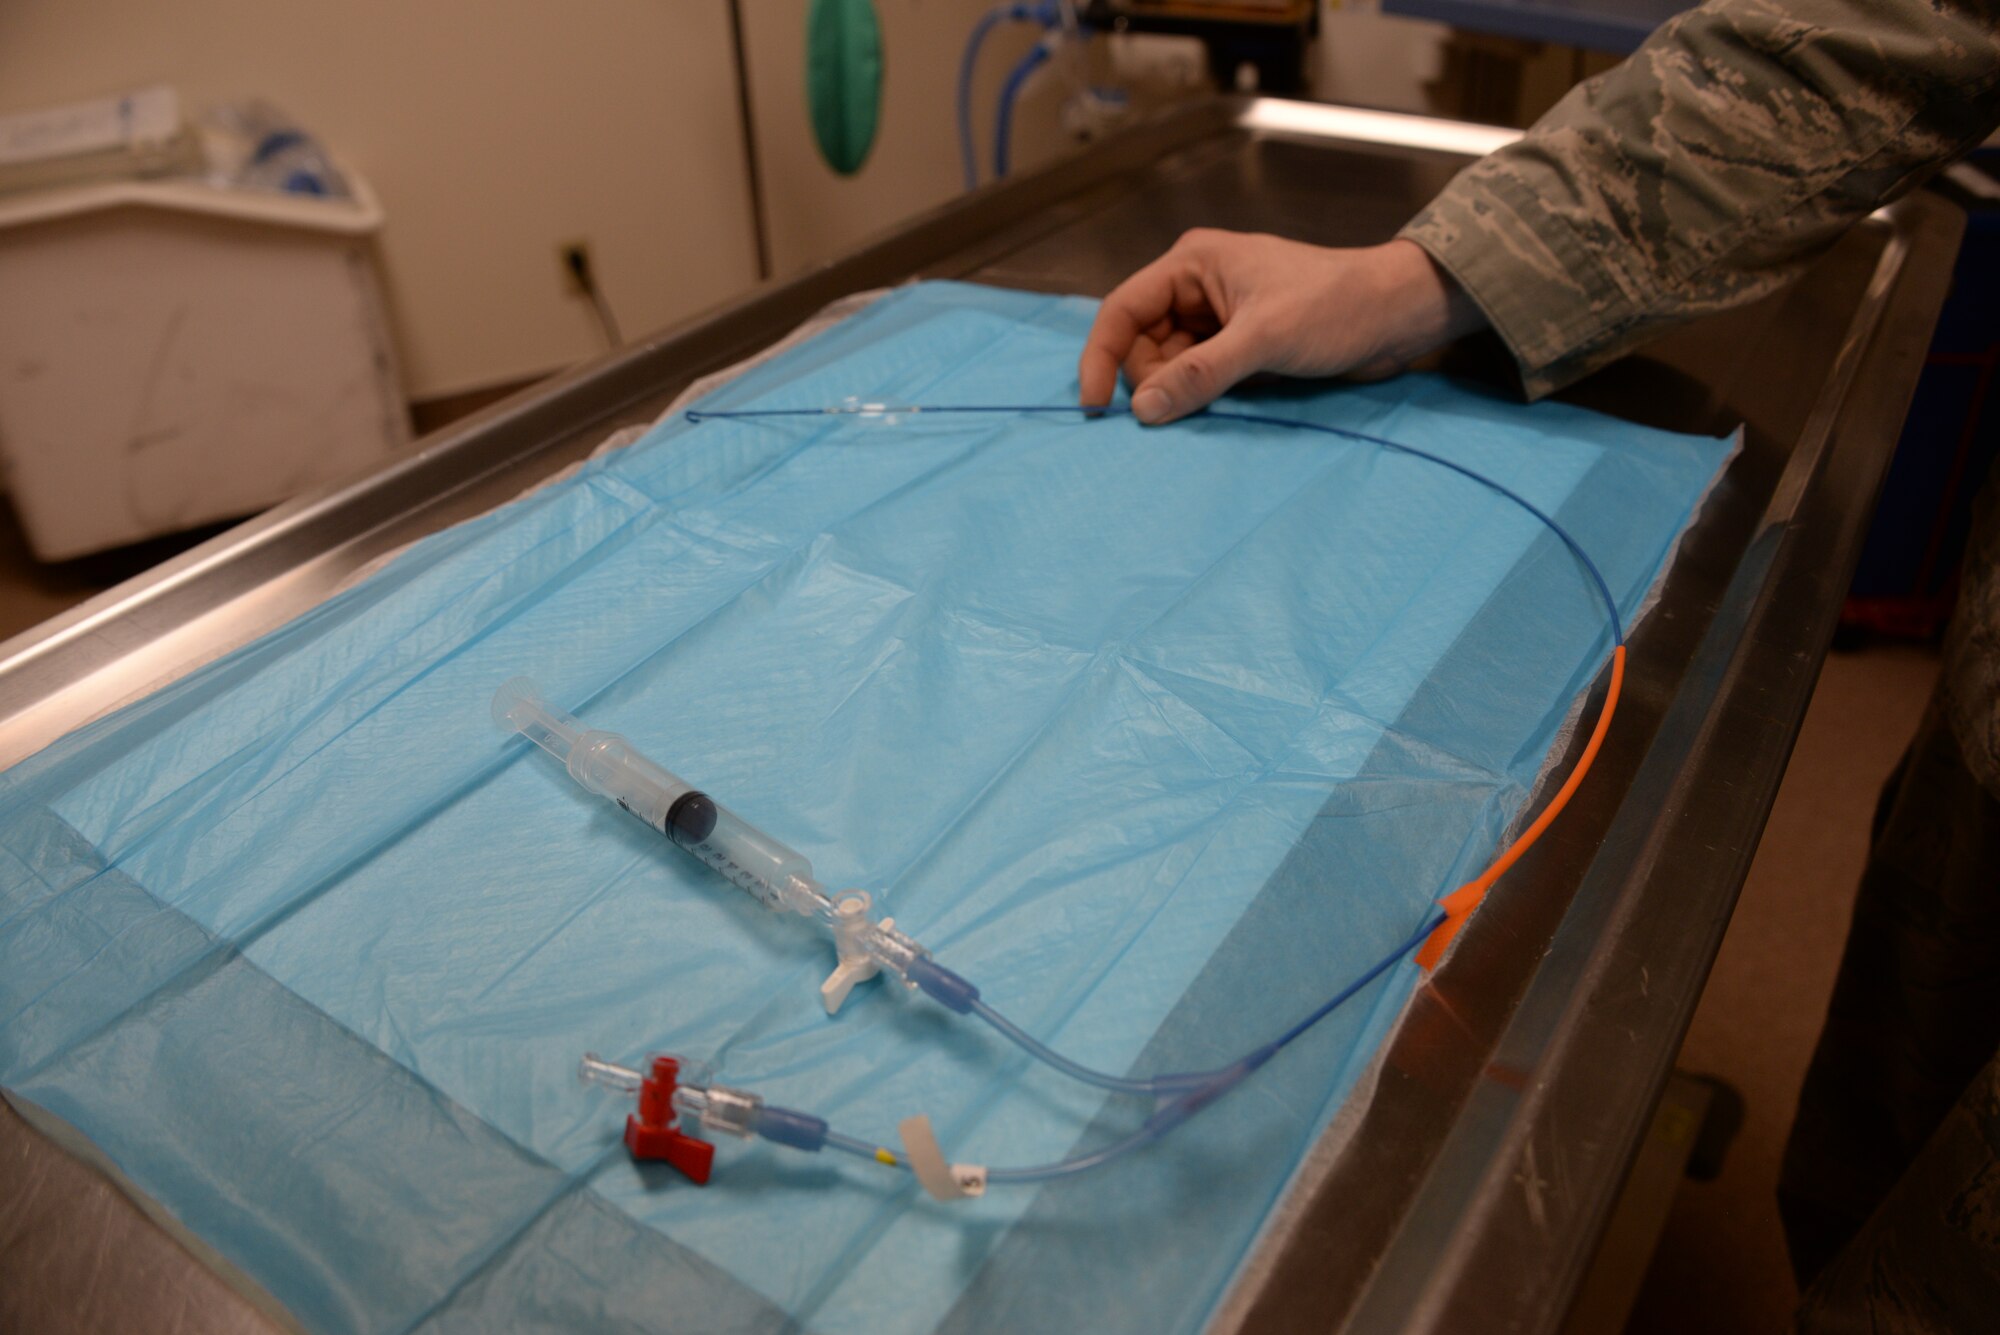 The REBOA catheter is a device that is inserted into a hemorrhaging vessel and stops or slows the blood flow to that injury while allowing blood flow to continue to vital organs and body parts. (U.S. Air Force photo by Senior Airman Amber Carter)